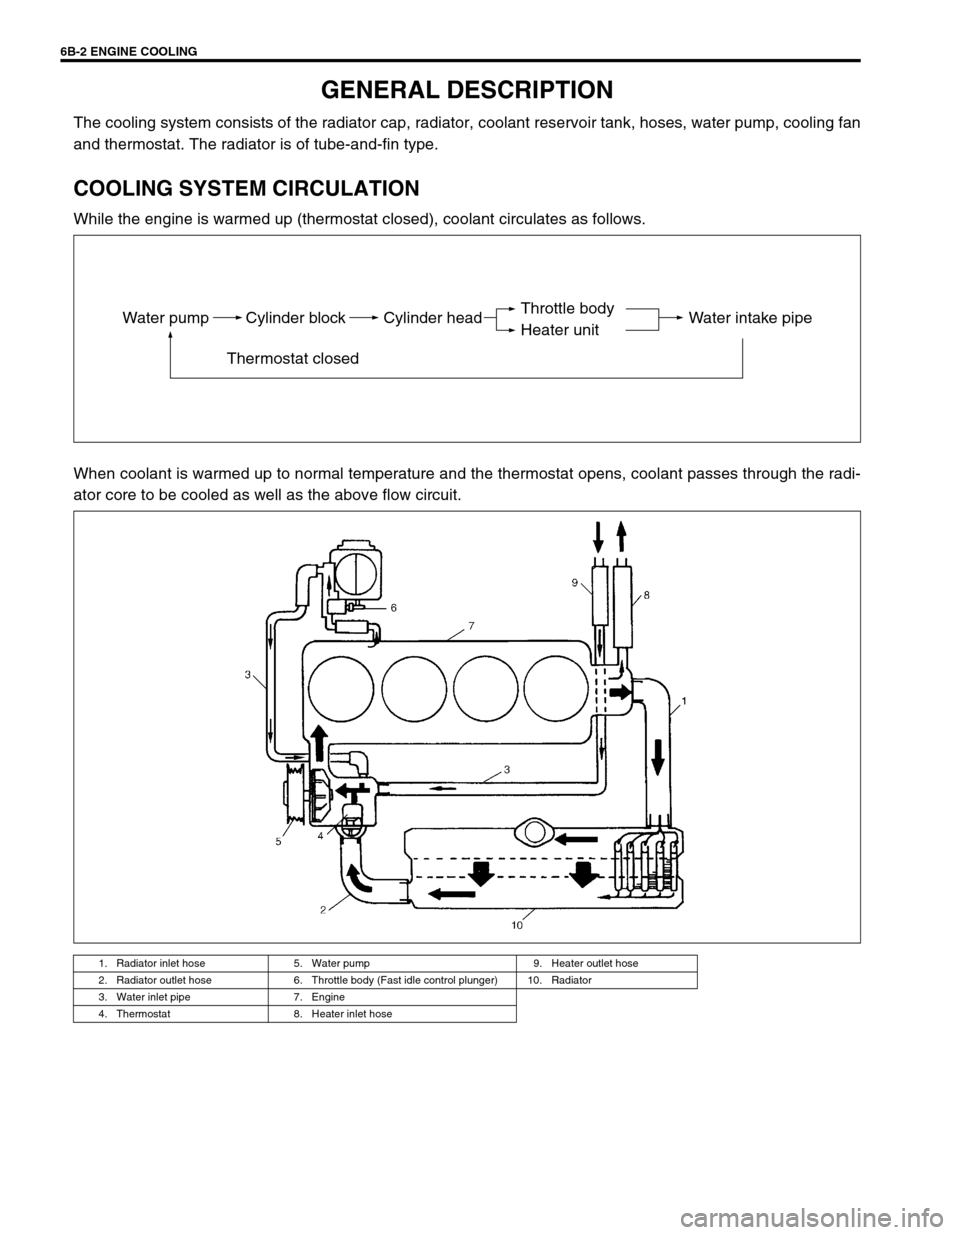 SUZUKI SWIFT 2000 1.G RG413 Service Owners Guide 6B-2 ENGINE COOLING
GENERAL DESCRIPTION
The cooling system consists of the radiator cap, radiator, coolant reservoir tank, hoses, water pump, cooling fan
and thermostat. The radiator is of tube-and-fi